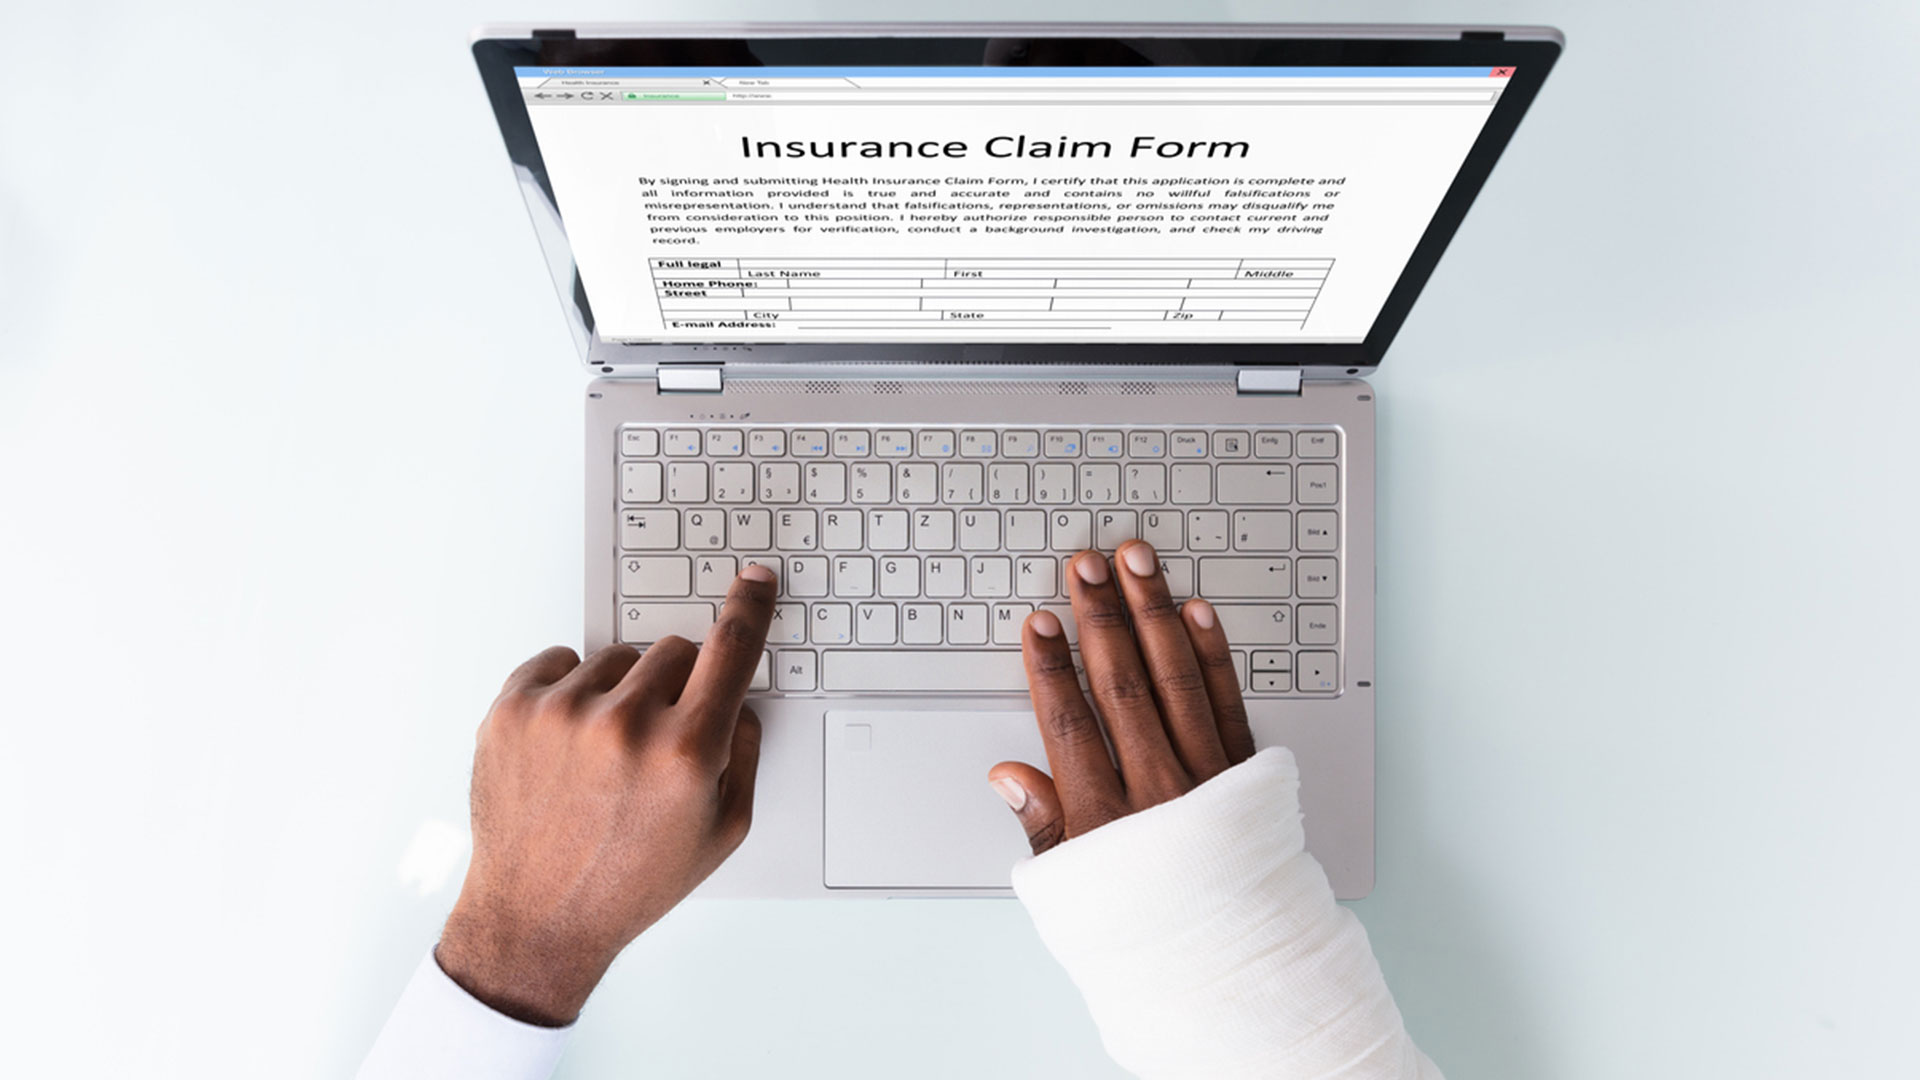 Insurance claims handling set to become a financial service